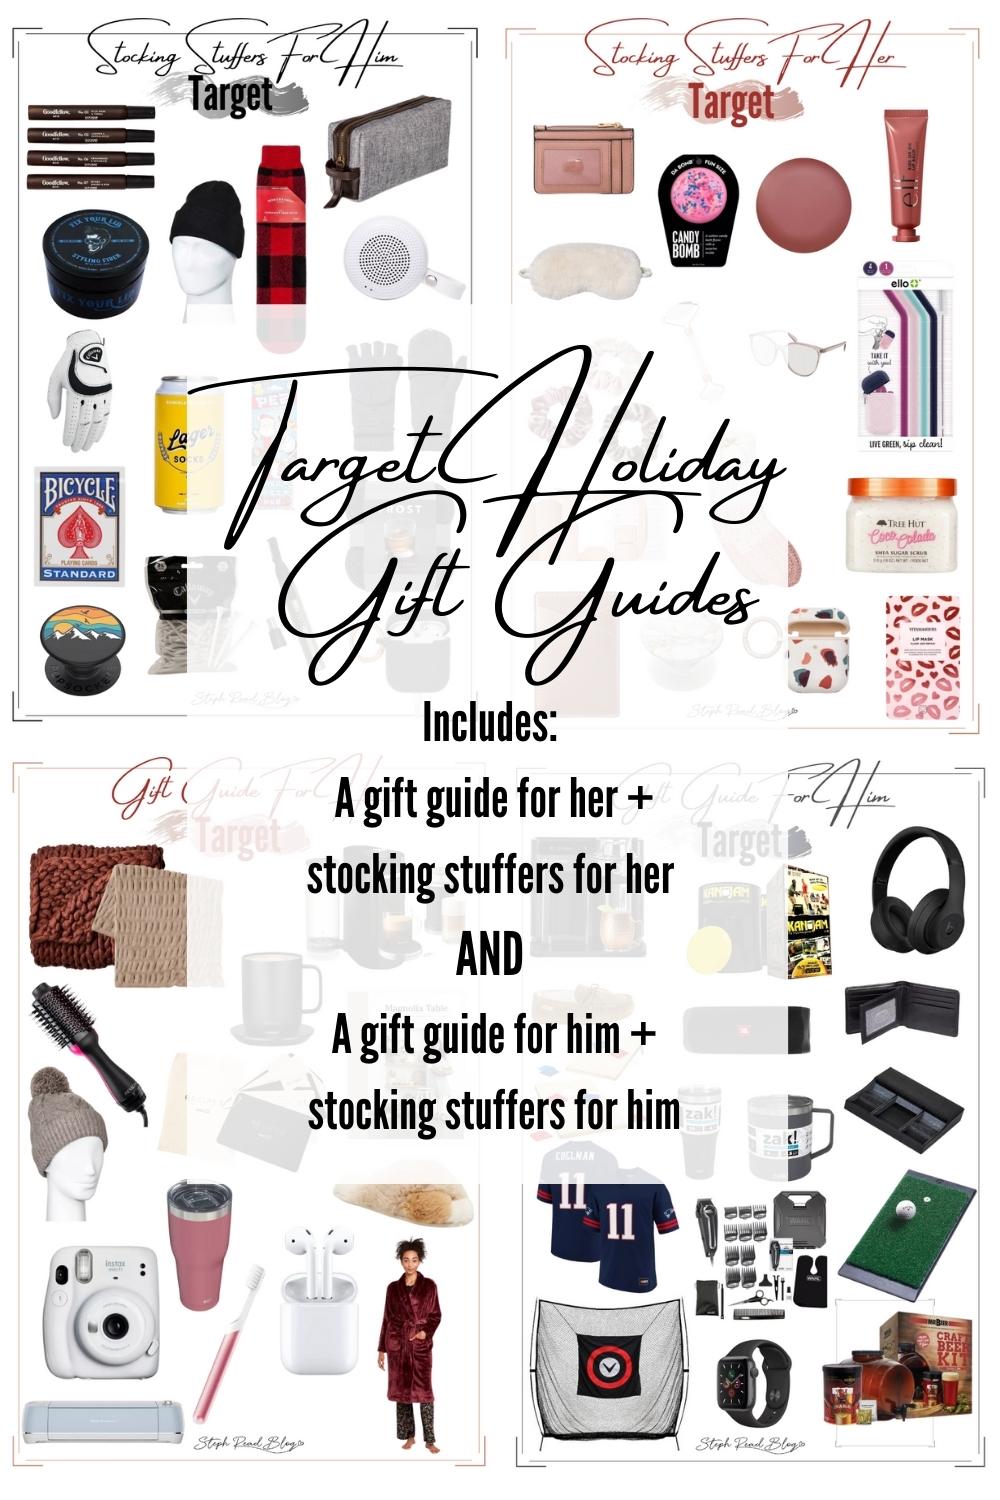 2019 Stocking Stuffer Gift Guide - 30 Gifts Under $25